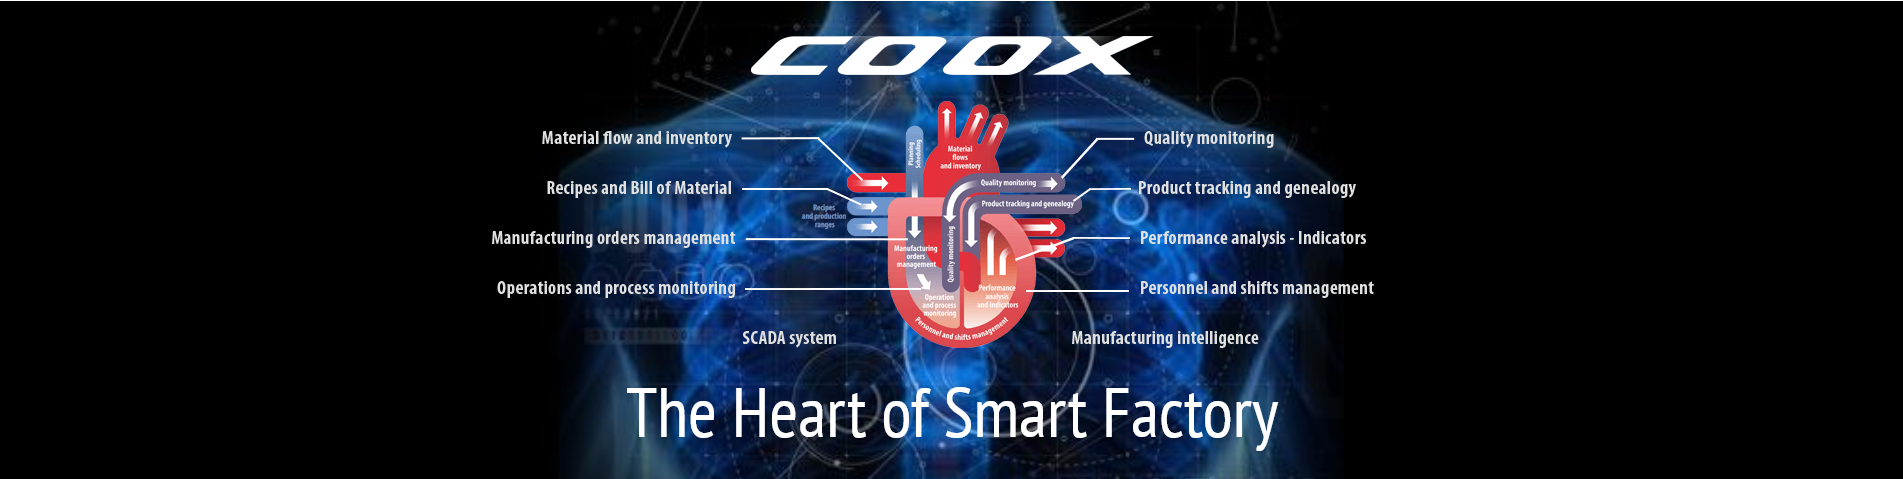 The Heart of Smart Factory